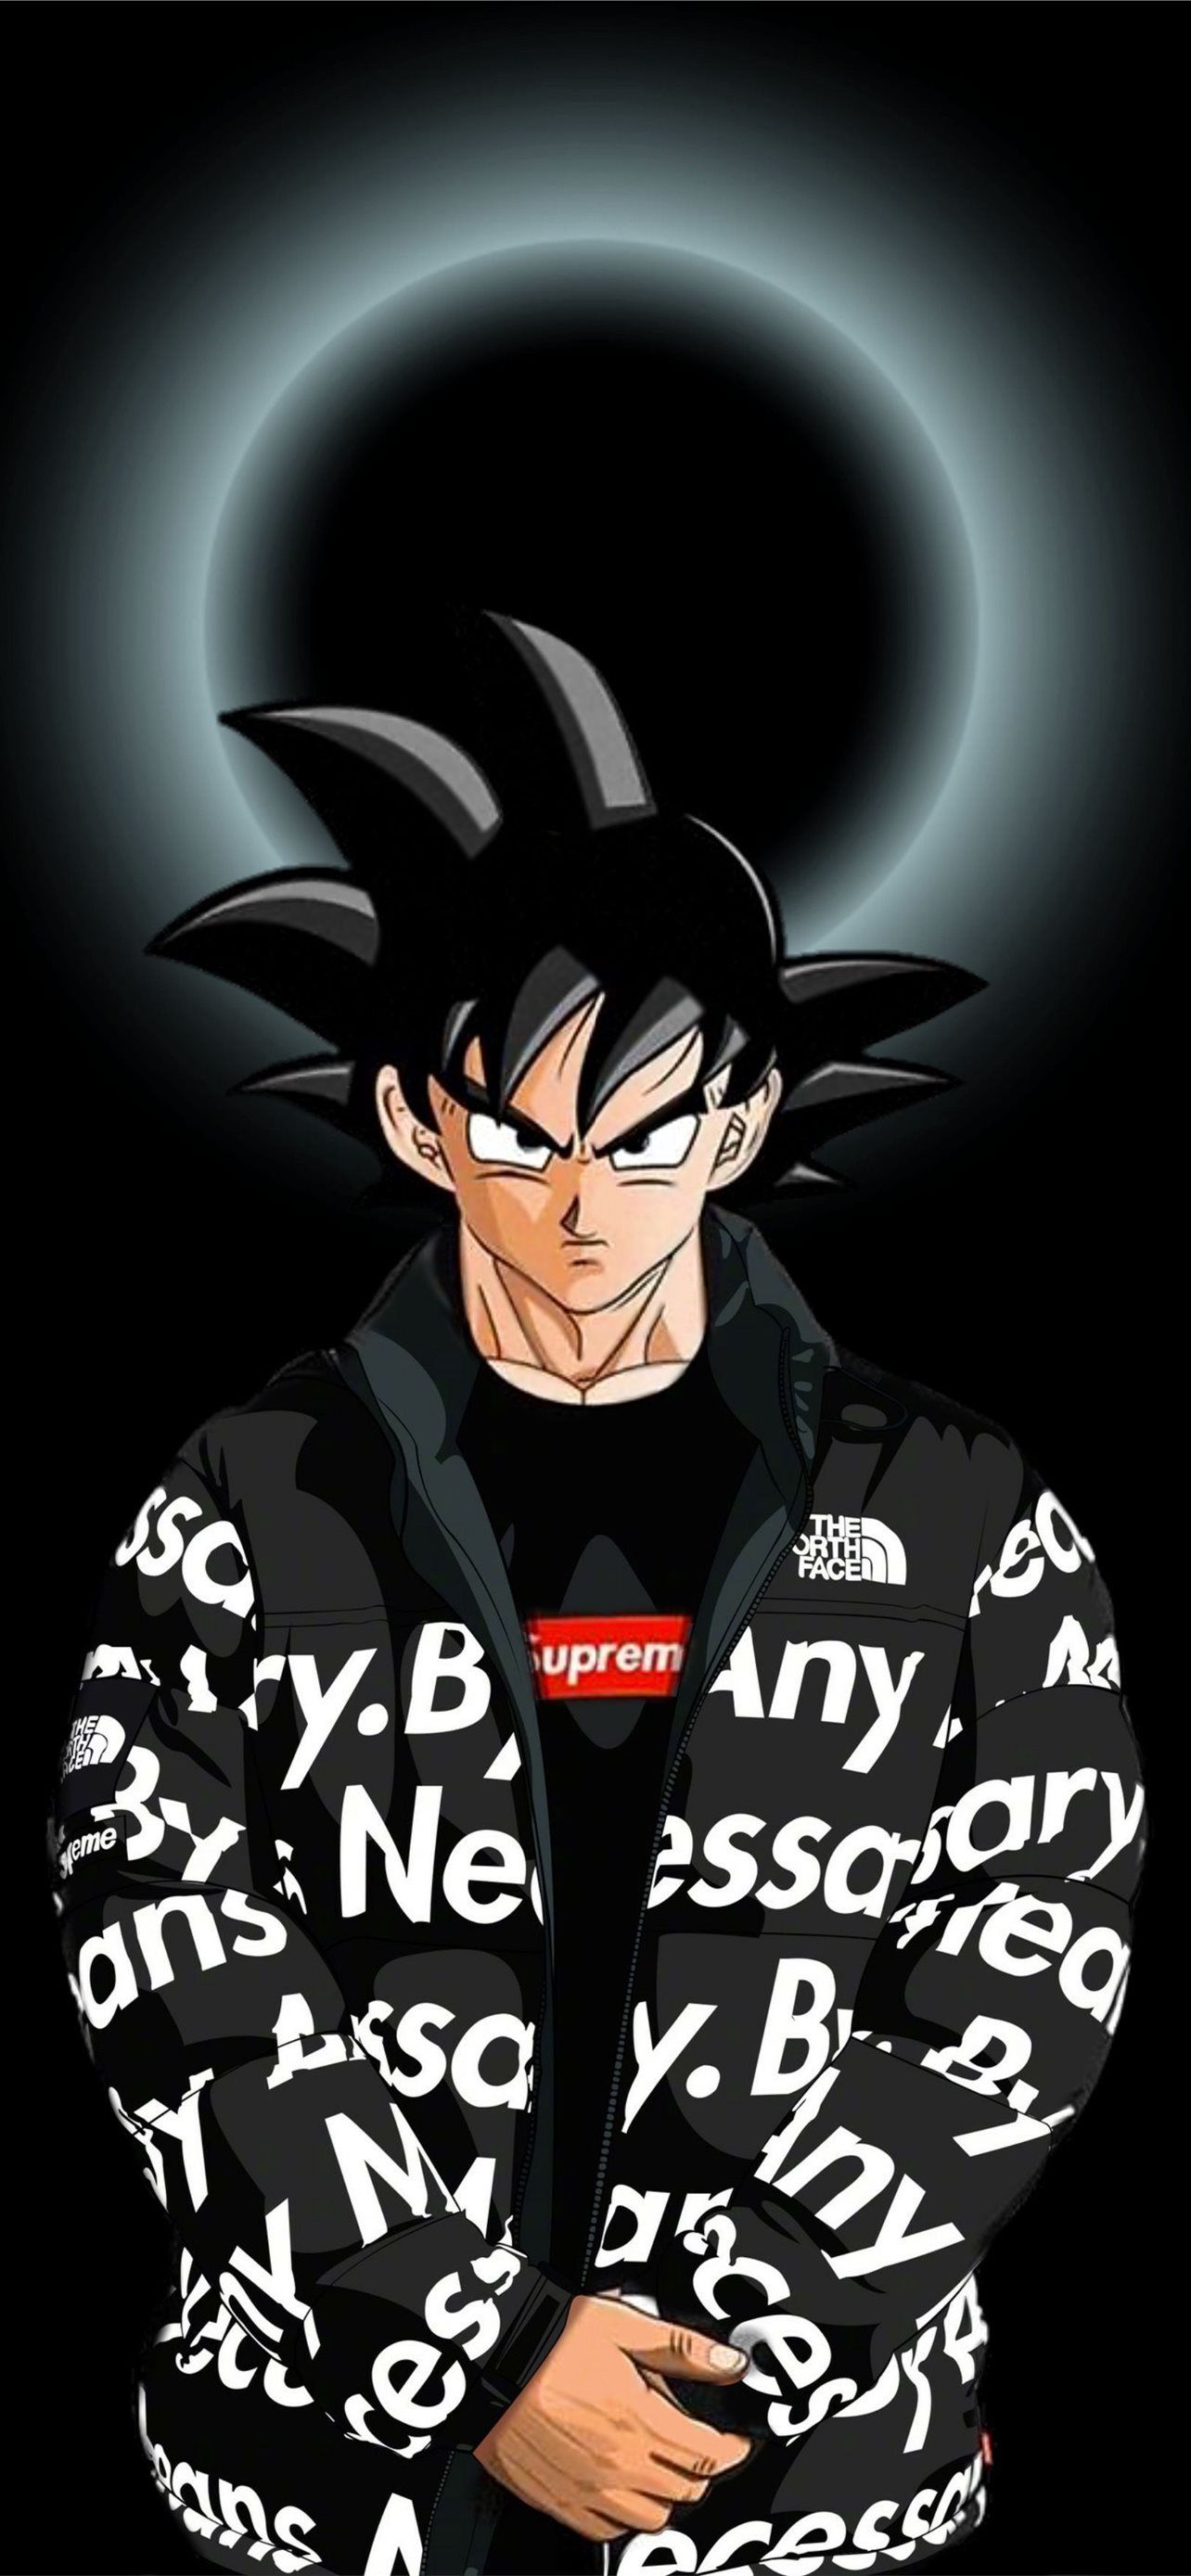 A man in black and white clothing with his arms crossed - Goku, Dragon Ball, Supreme